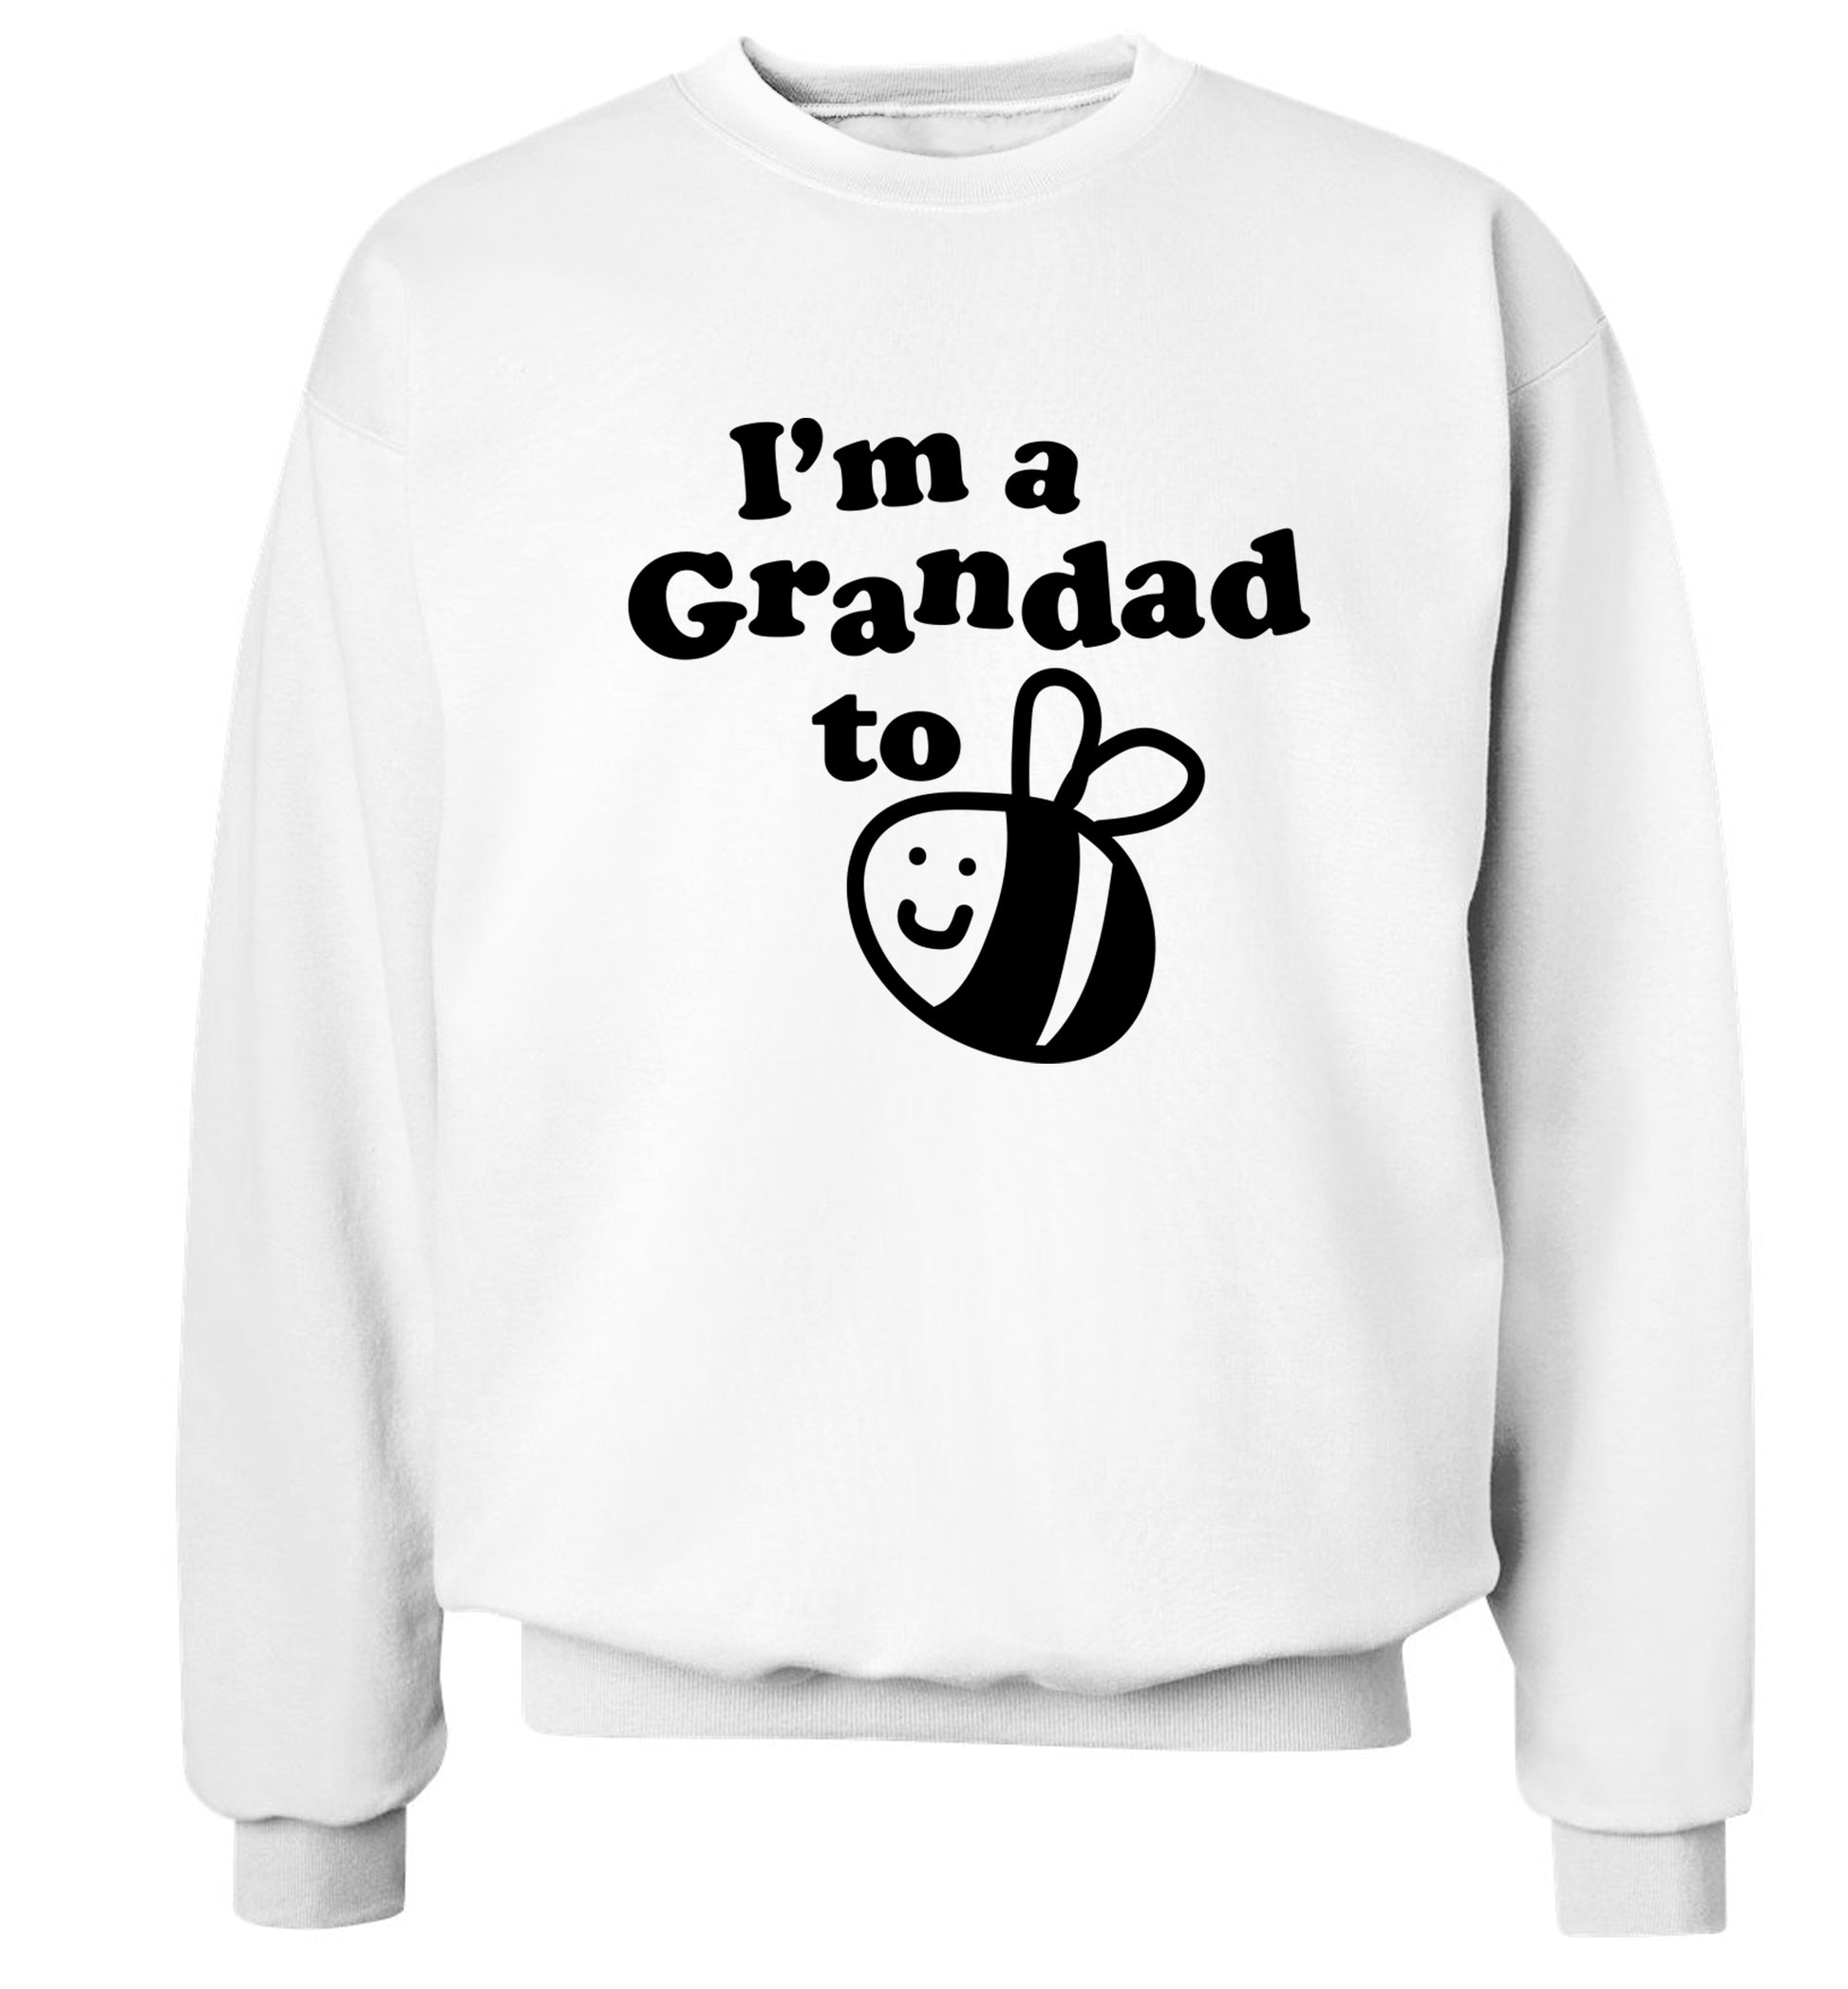 I'm a grandad to be Adult's unisex white Sweater 2XL